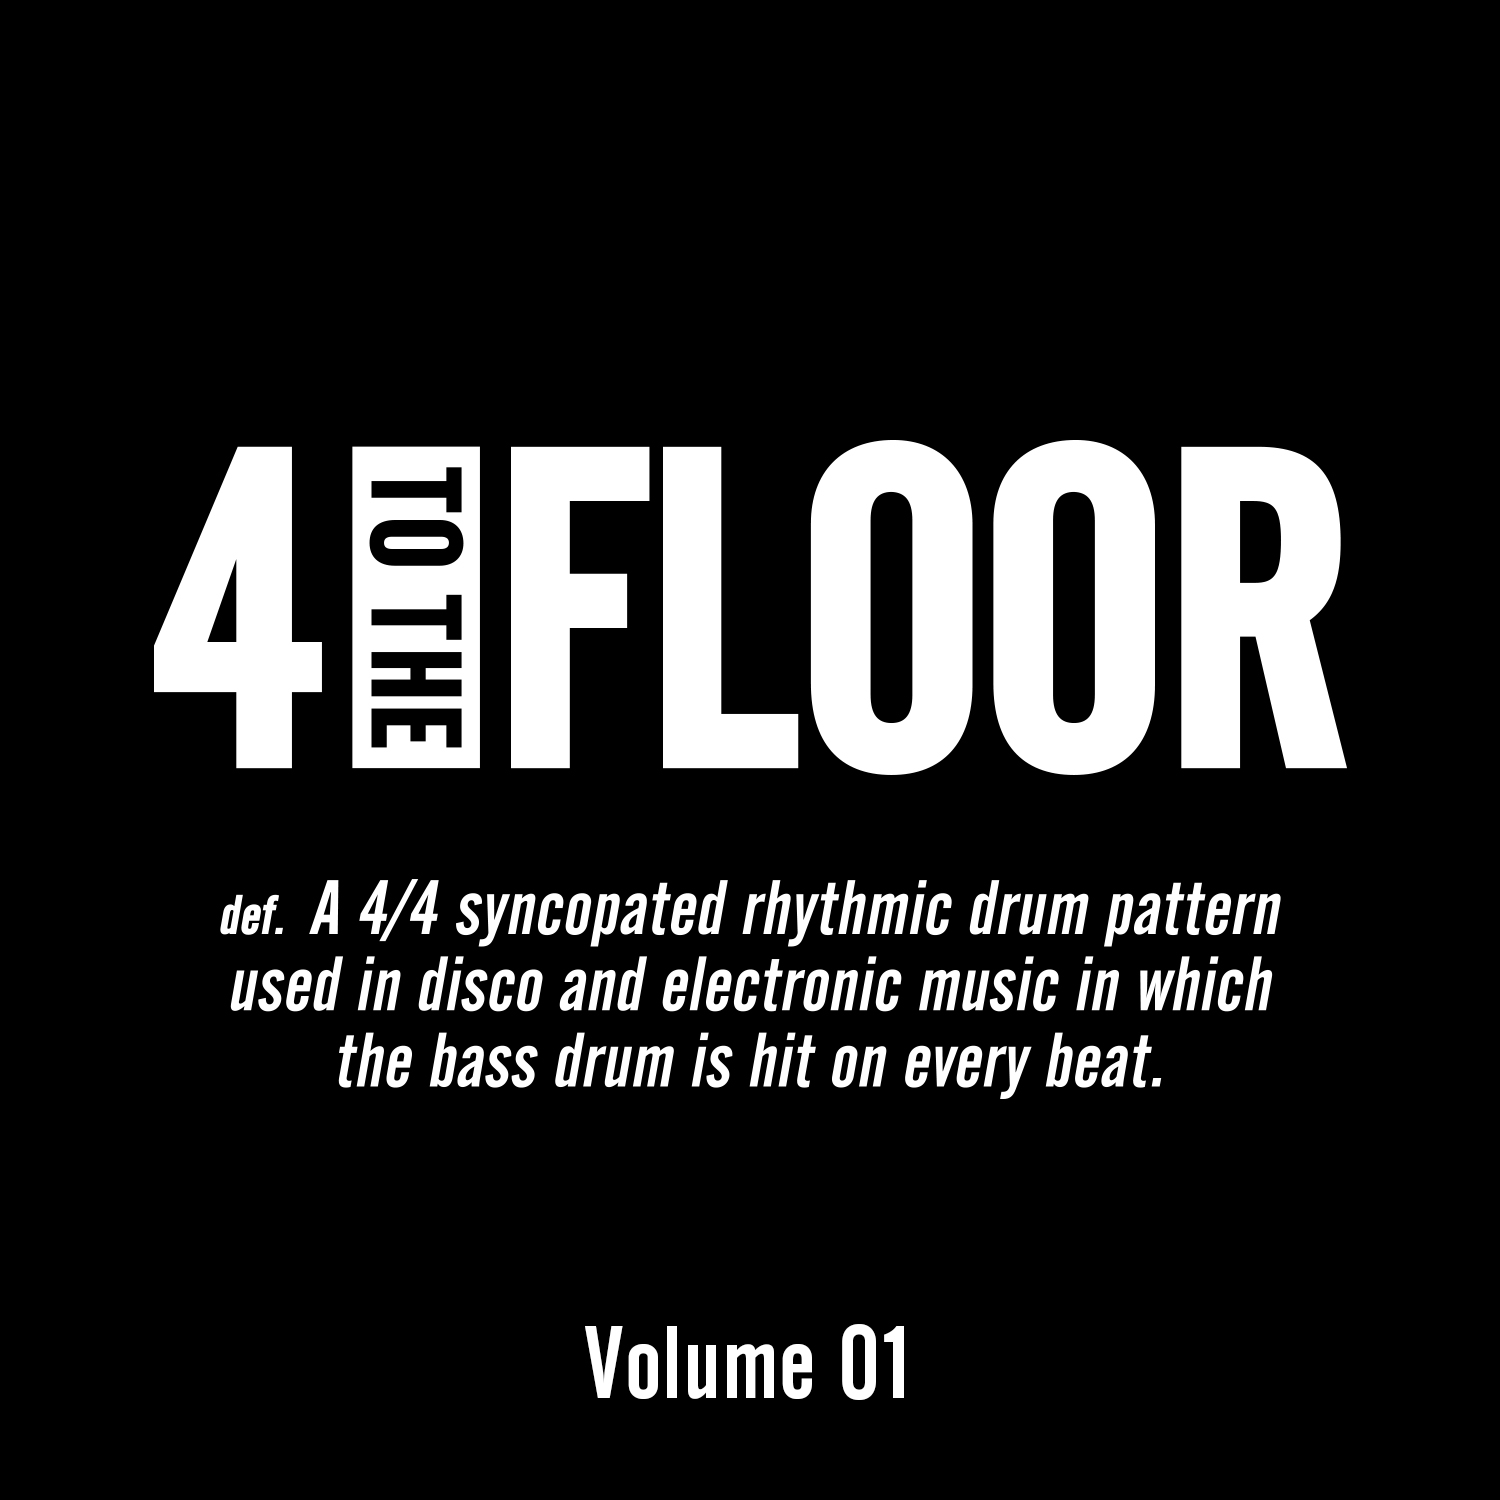 4 to the floor feat